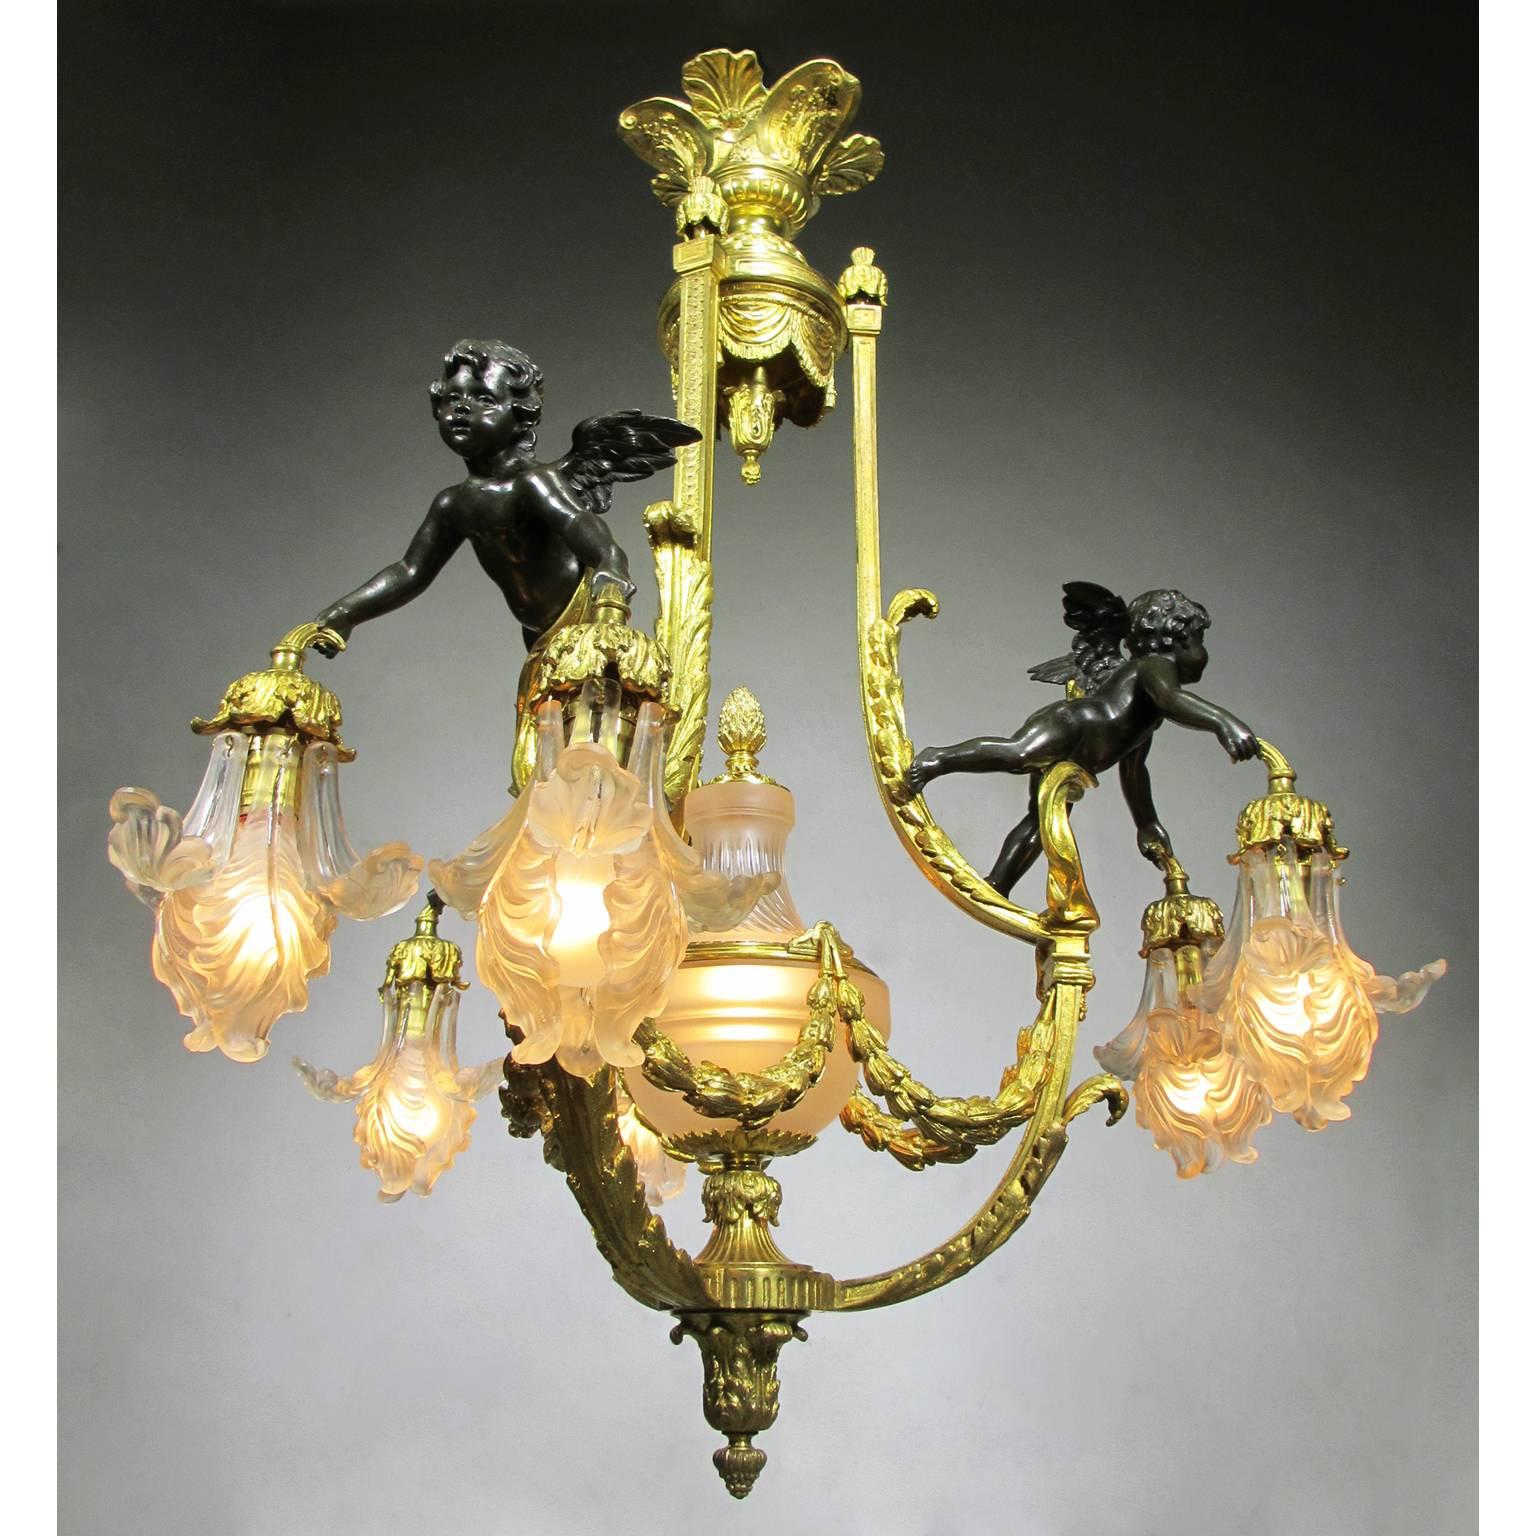 A very fine French 19th-20th century Belle Époque gilt bronze and patinated bronze figural six-light chandelier, with frosted glass shades shaped as flower petals in the manner of René Lalique (French, 1860-1945), centered with a frosted